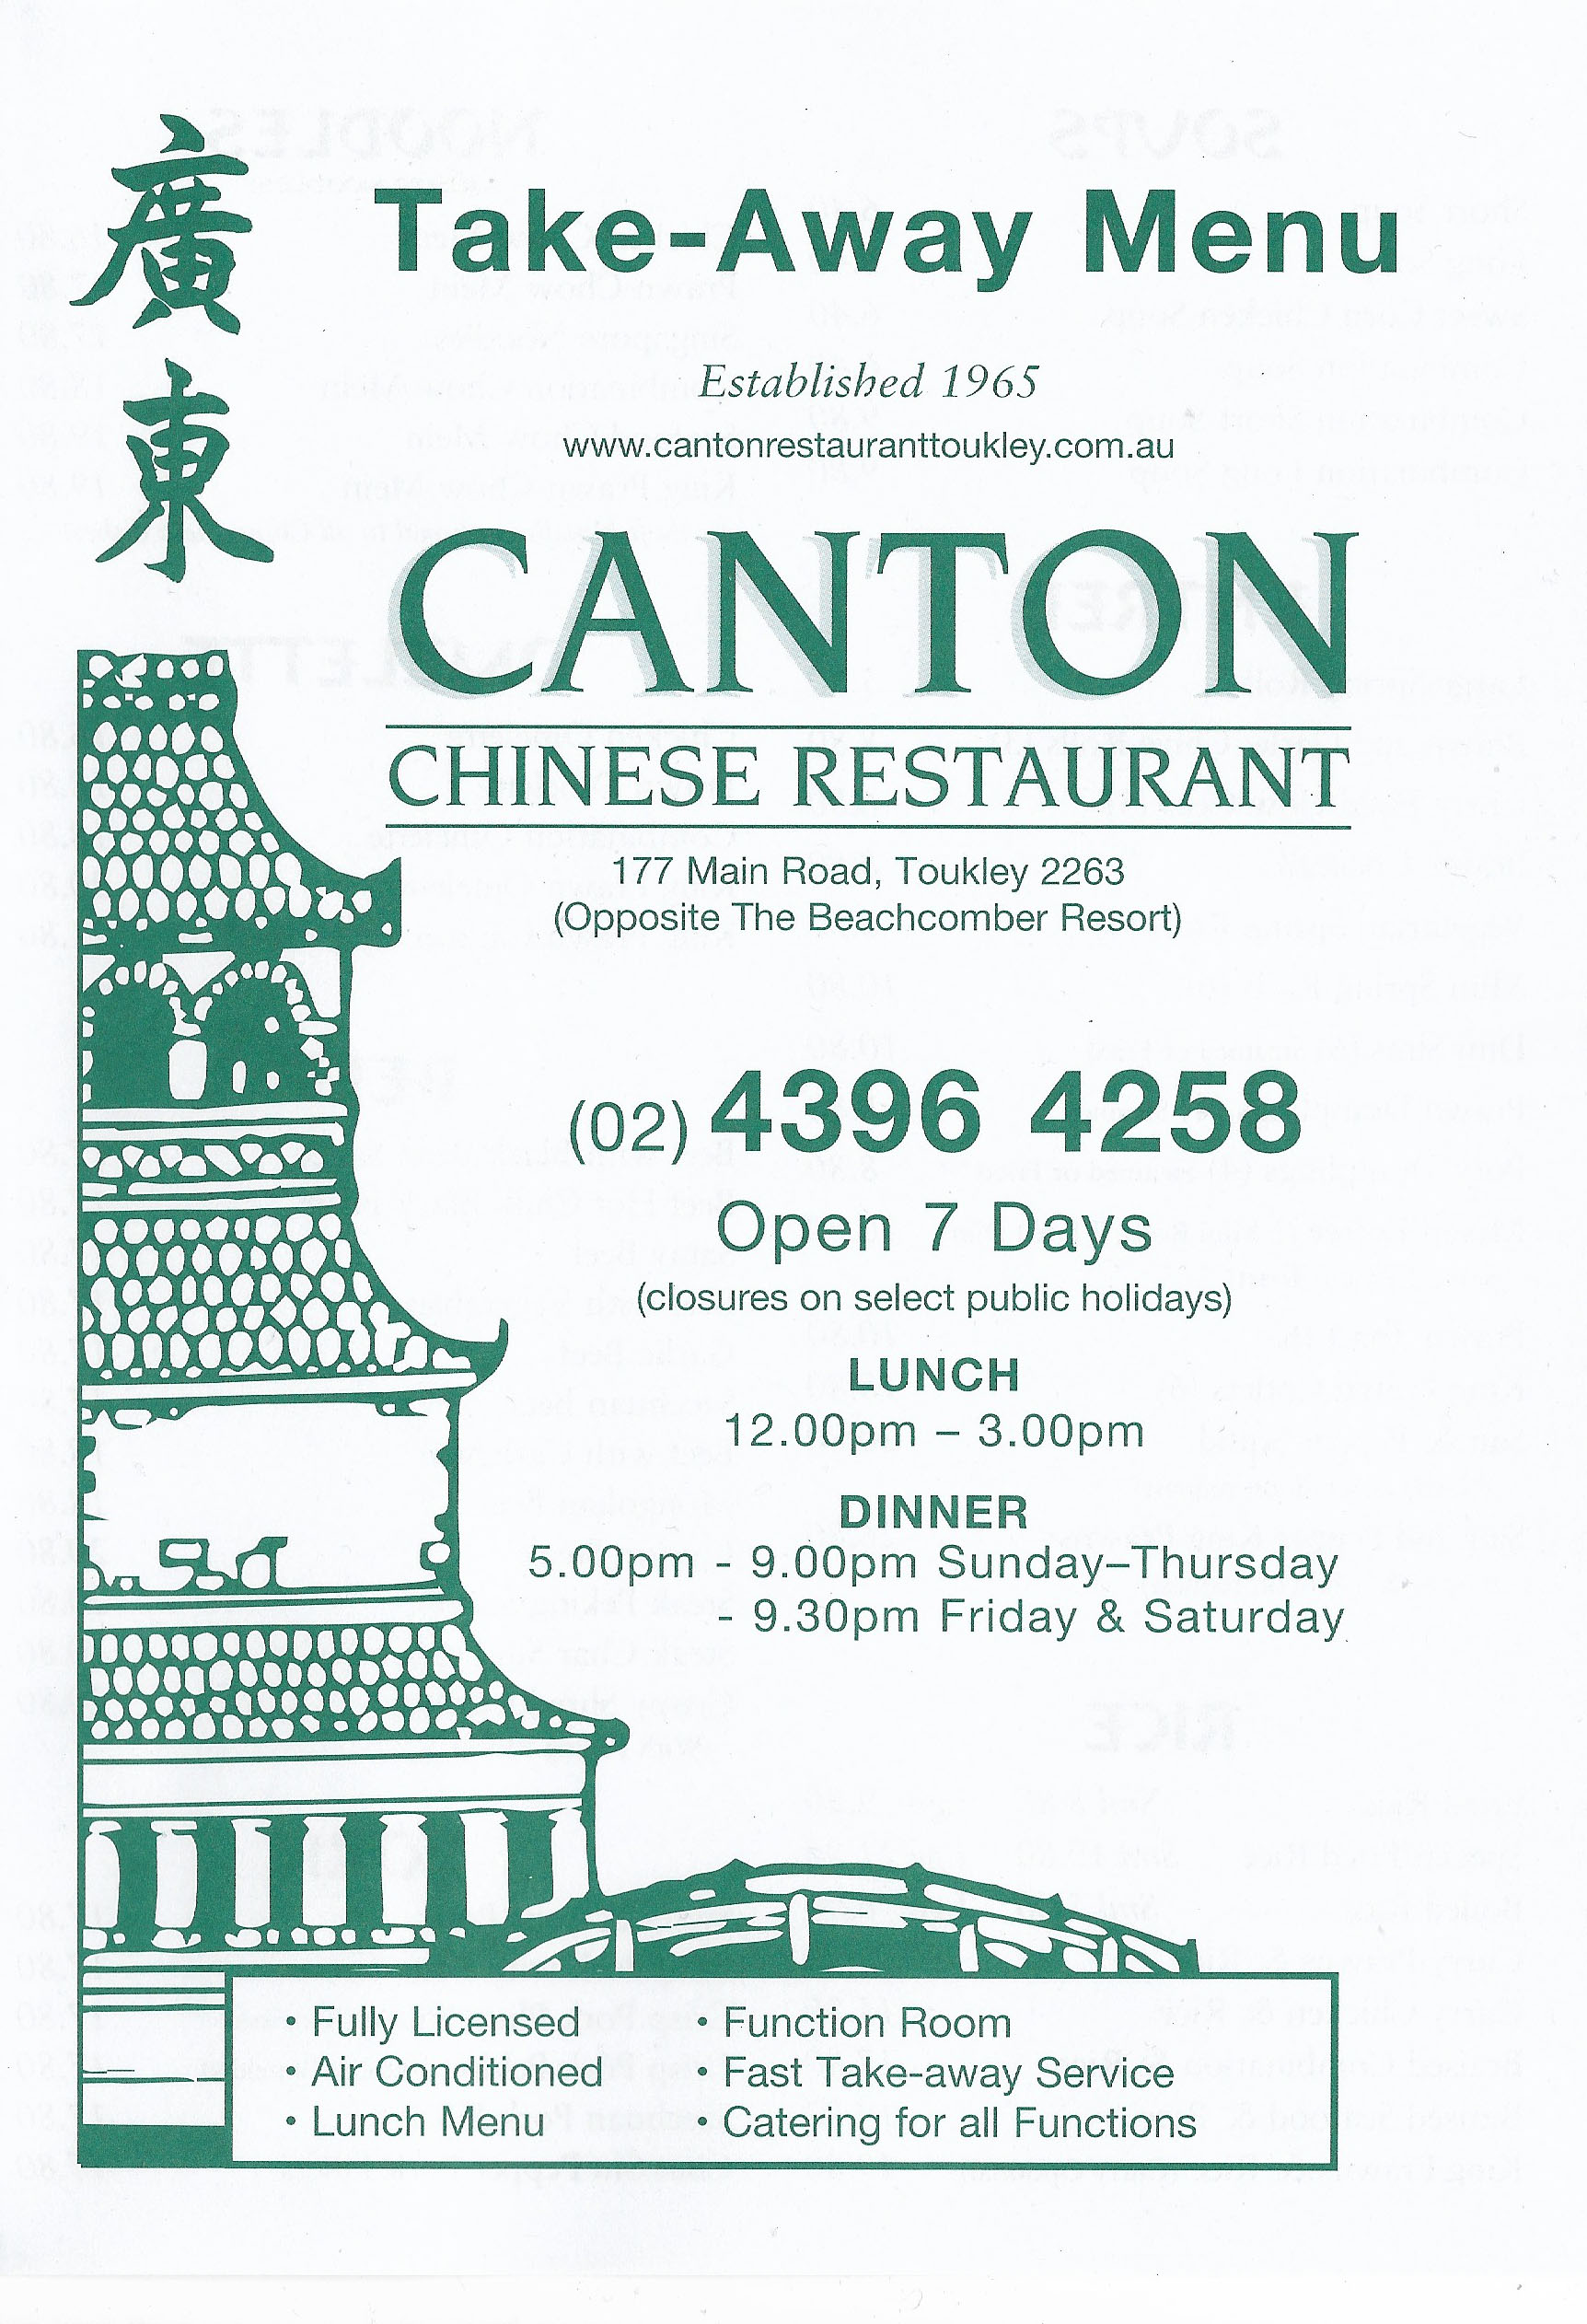 Canton Chinese Restaurant  Toukley Central Coast - NSW | OBZ Online Business Zone